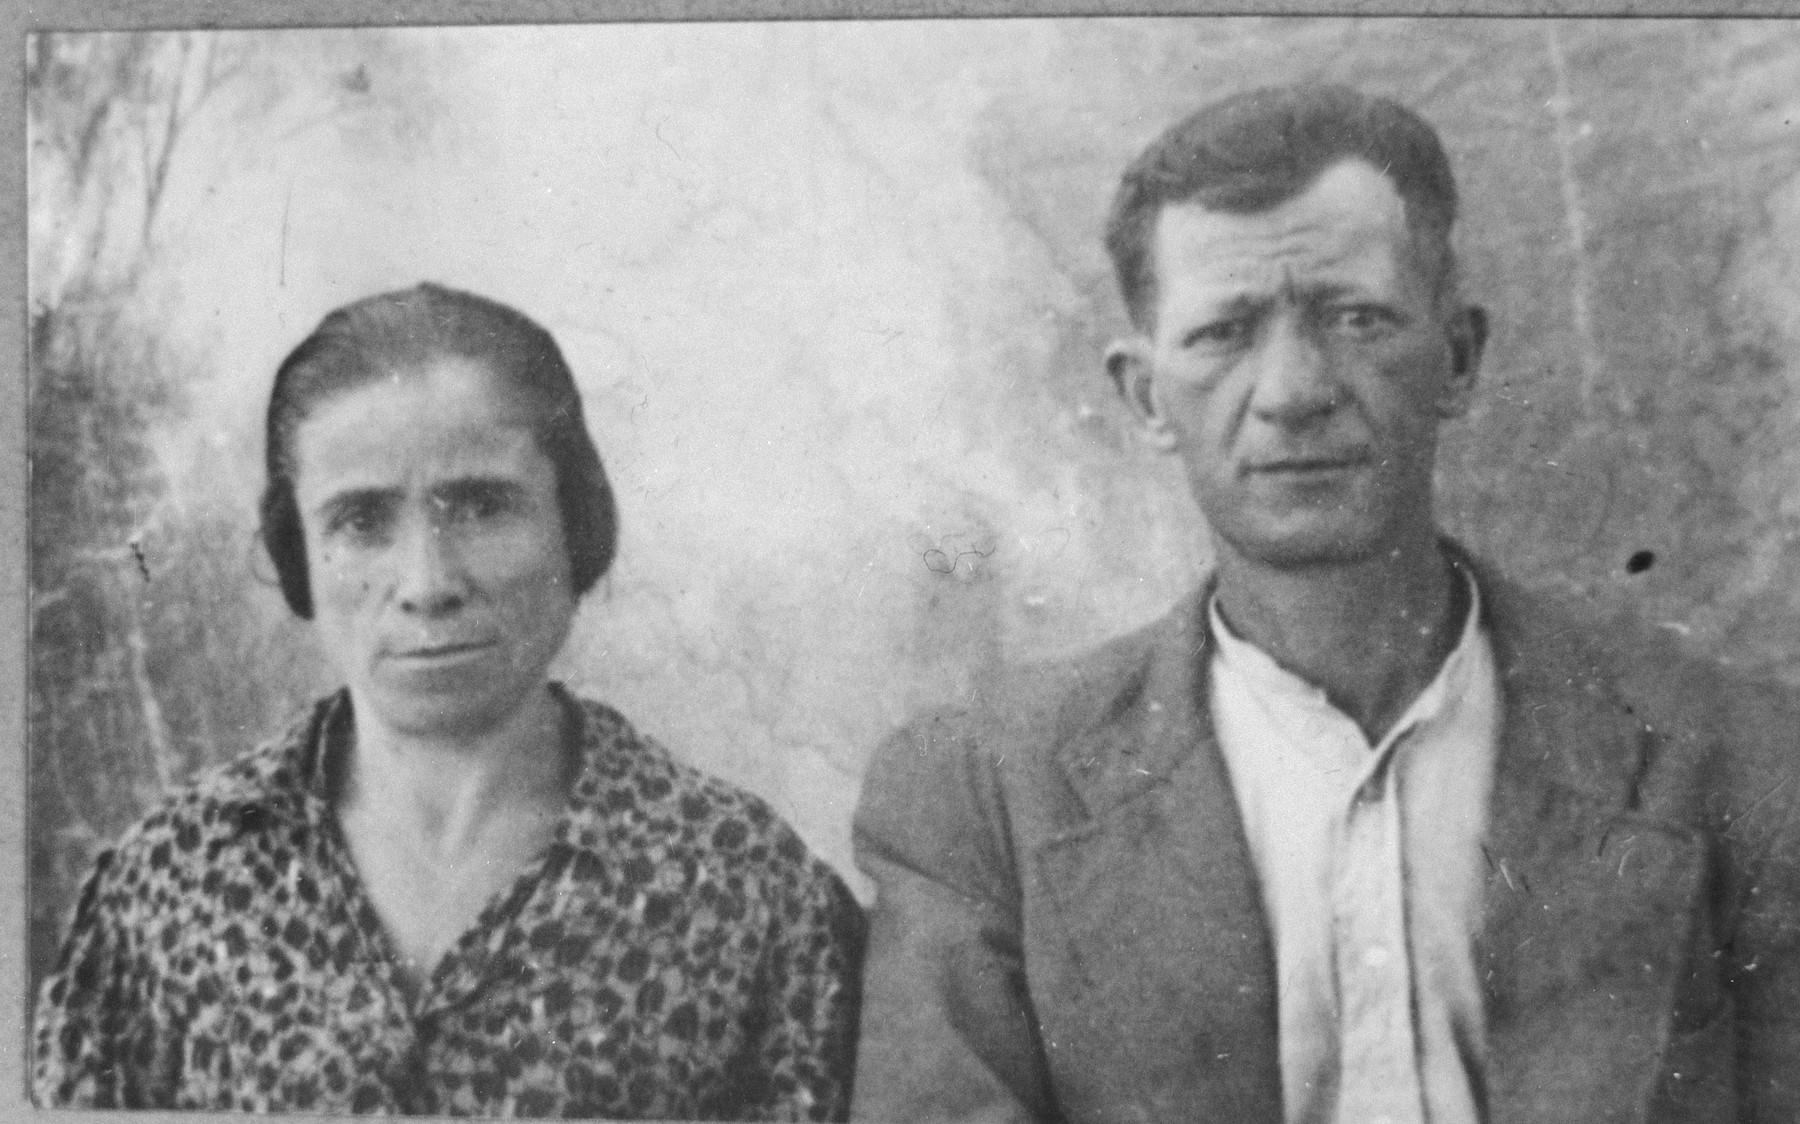 Portrait of Yosef (I.) Pardo and his wife, Sara.  They lived at Kossantchitcheva 9 in Bitola.